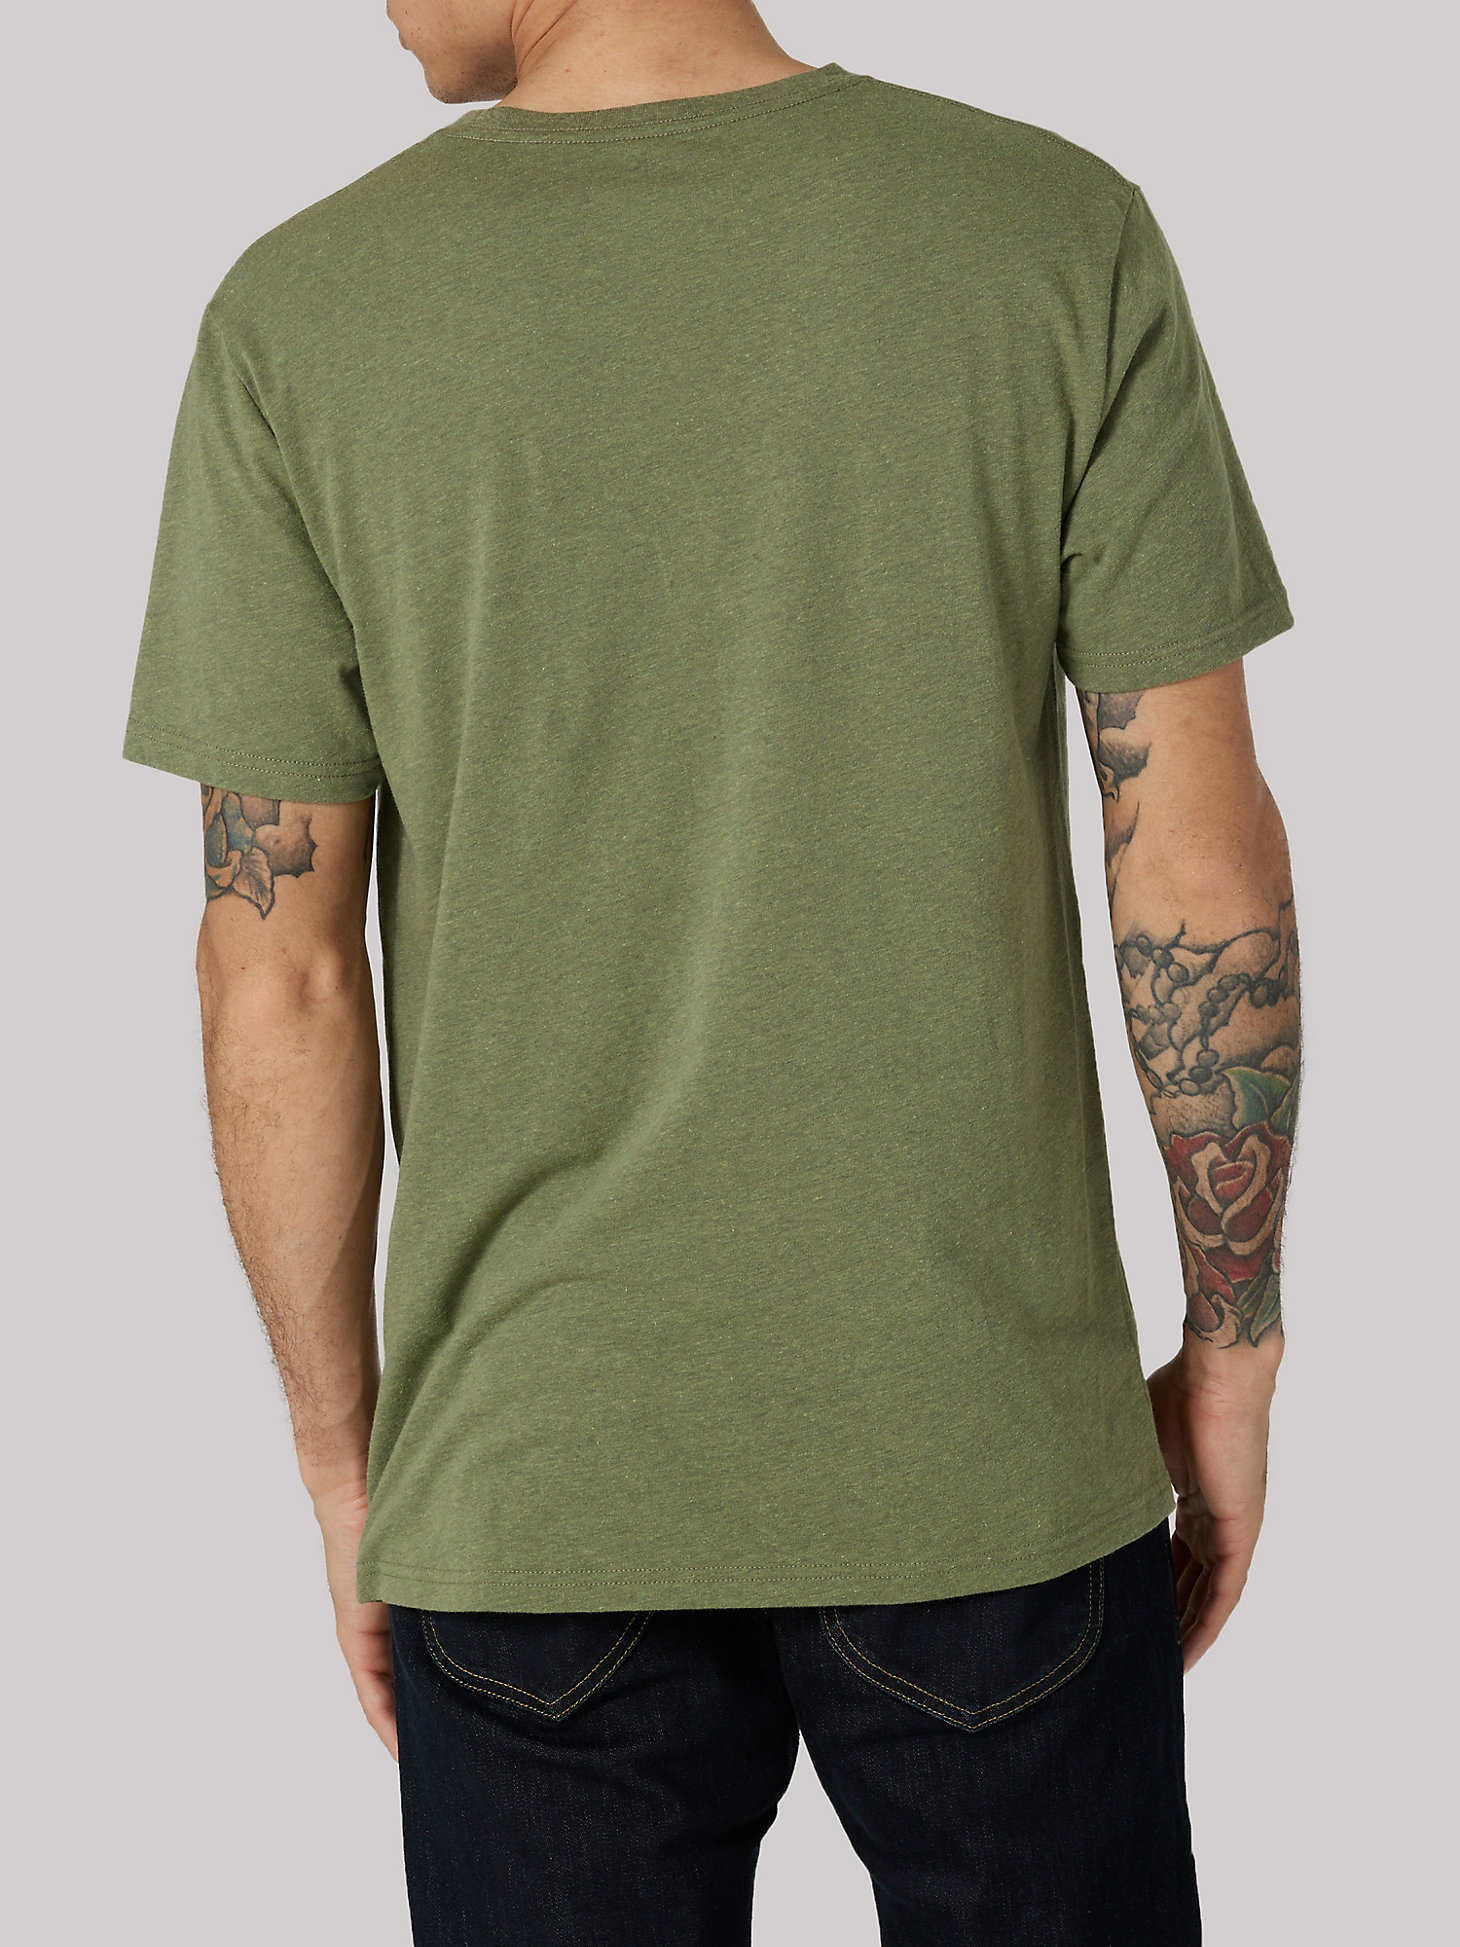 Men's East Ave Tavern Graphic Tee in Burnt Olive Heather alternative view 1